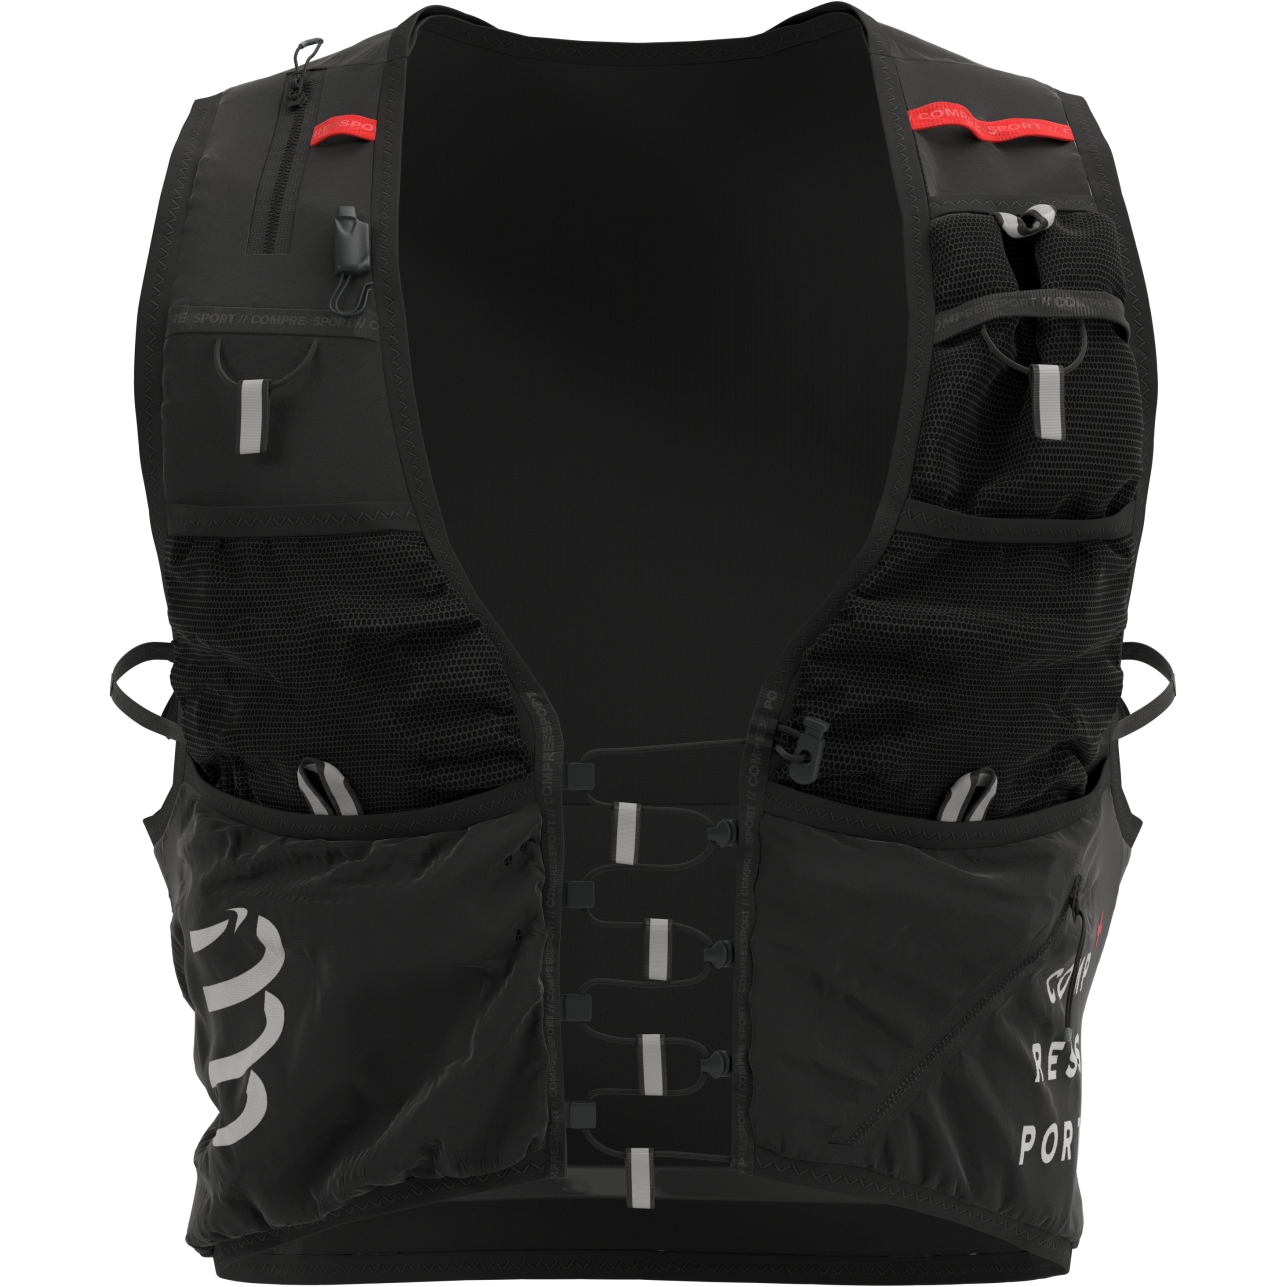 Picture of Compressport UltRun S Pack Evo 10L Hydration Backpack - black